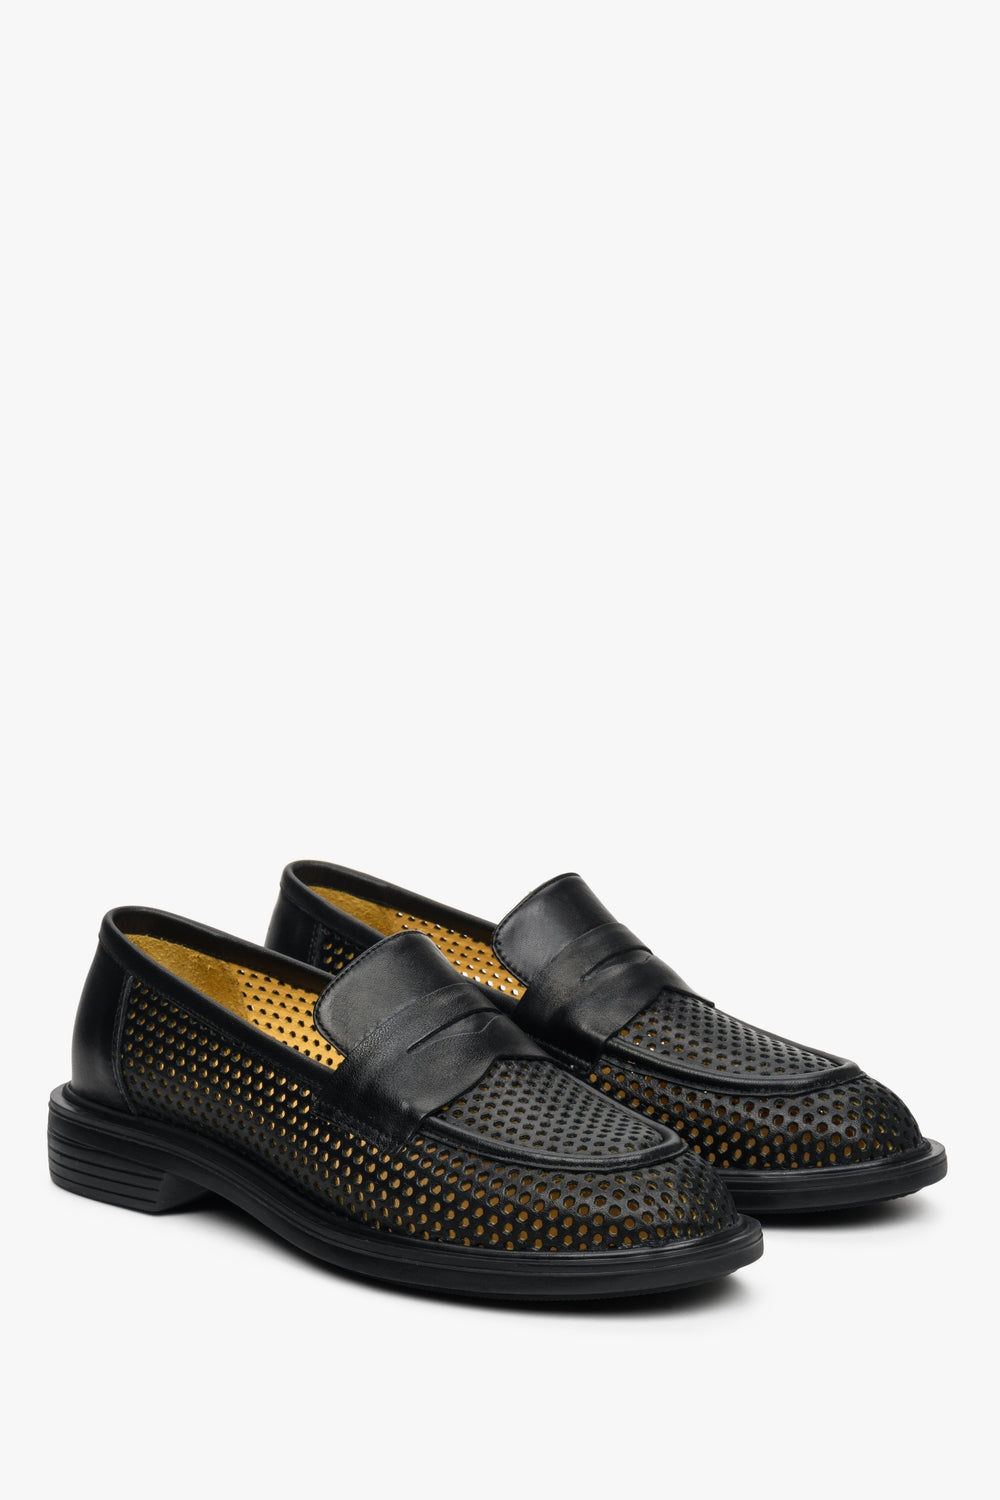 Women's black fall/spring loafers with perforation -presentation of the toe and side vamp.